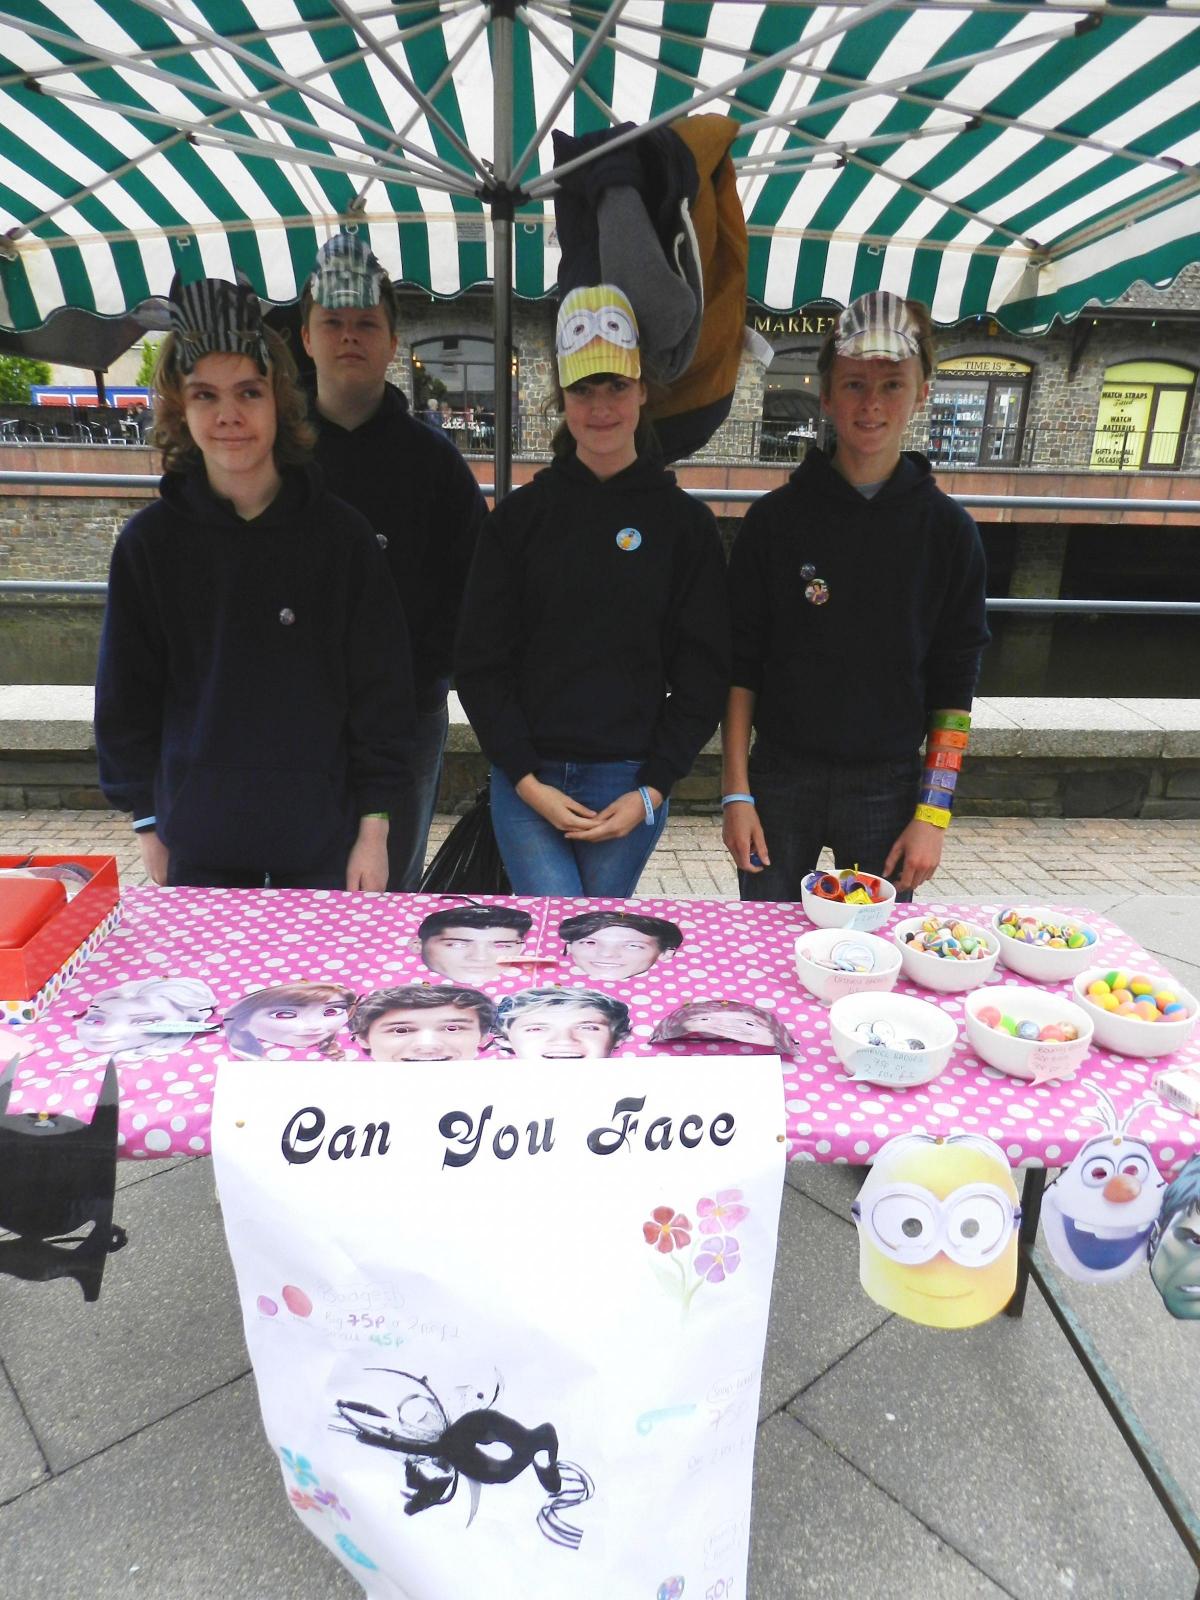 Among the items being sold by students in Year 10 at Castle School were celebrity masks.